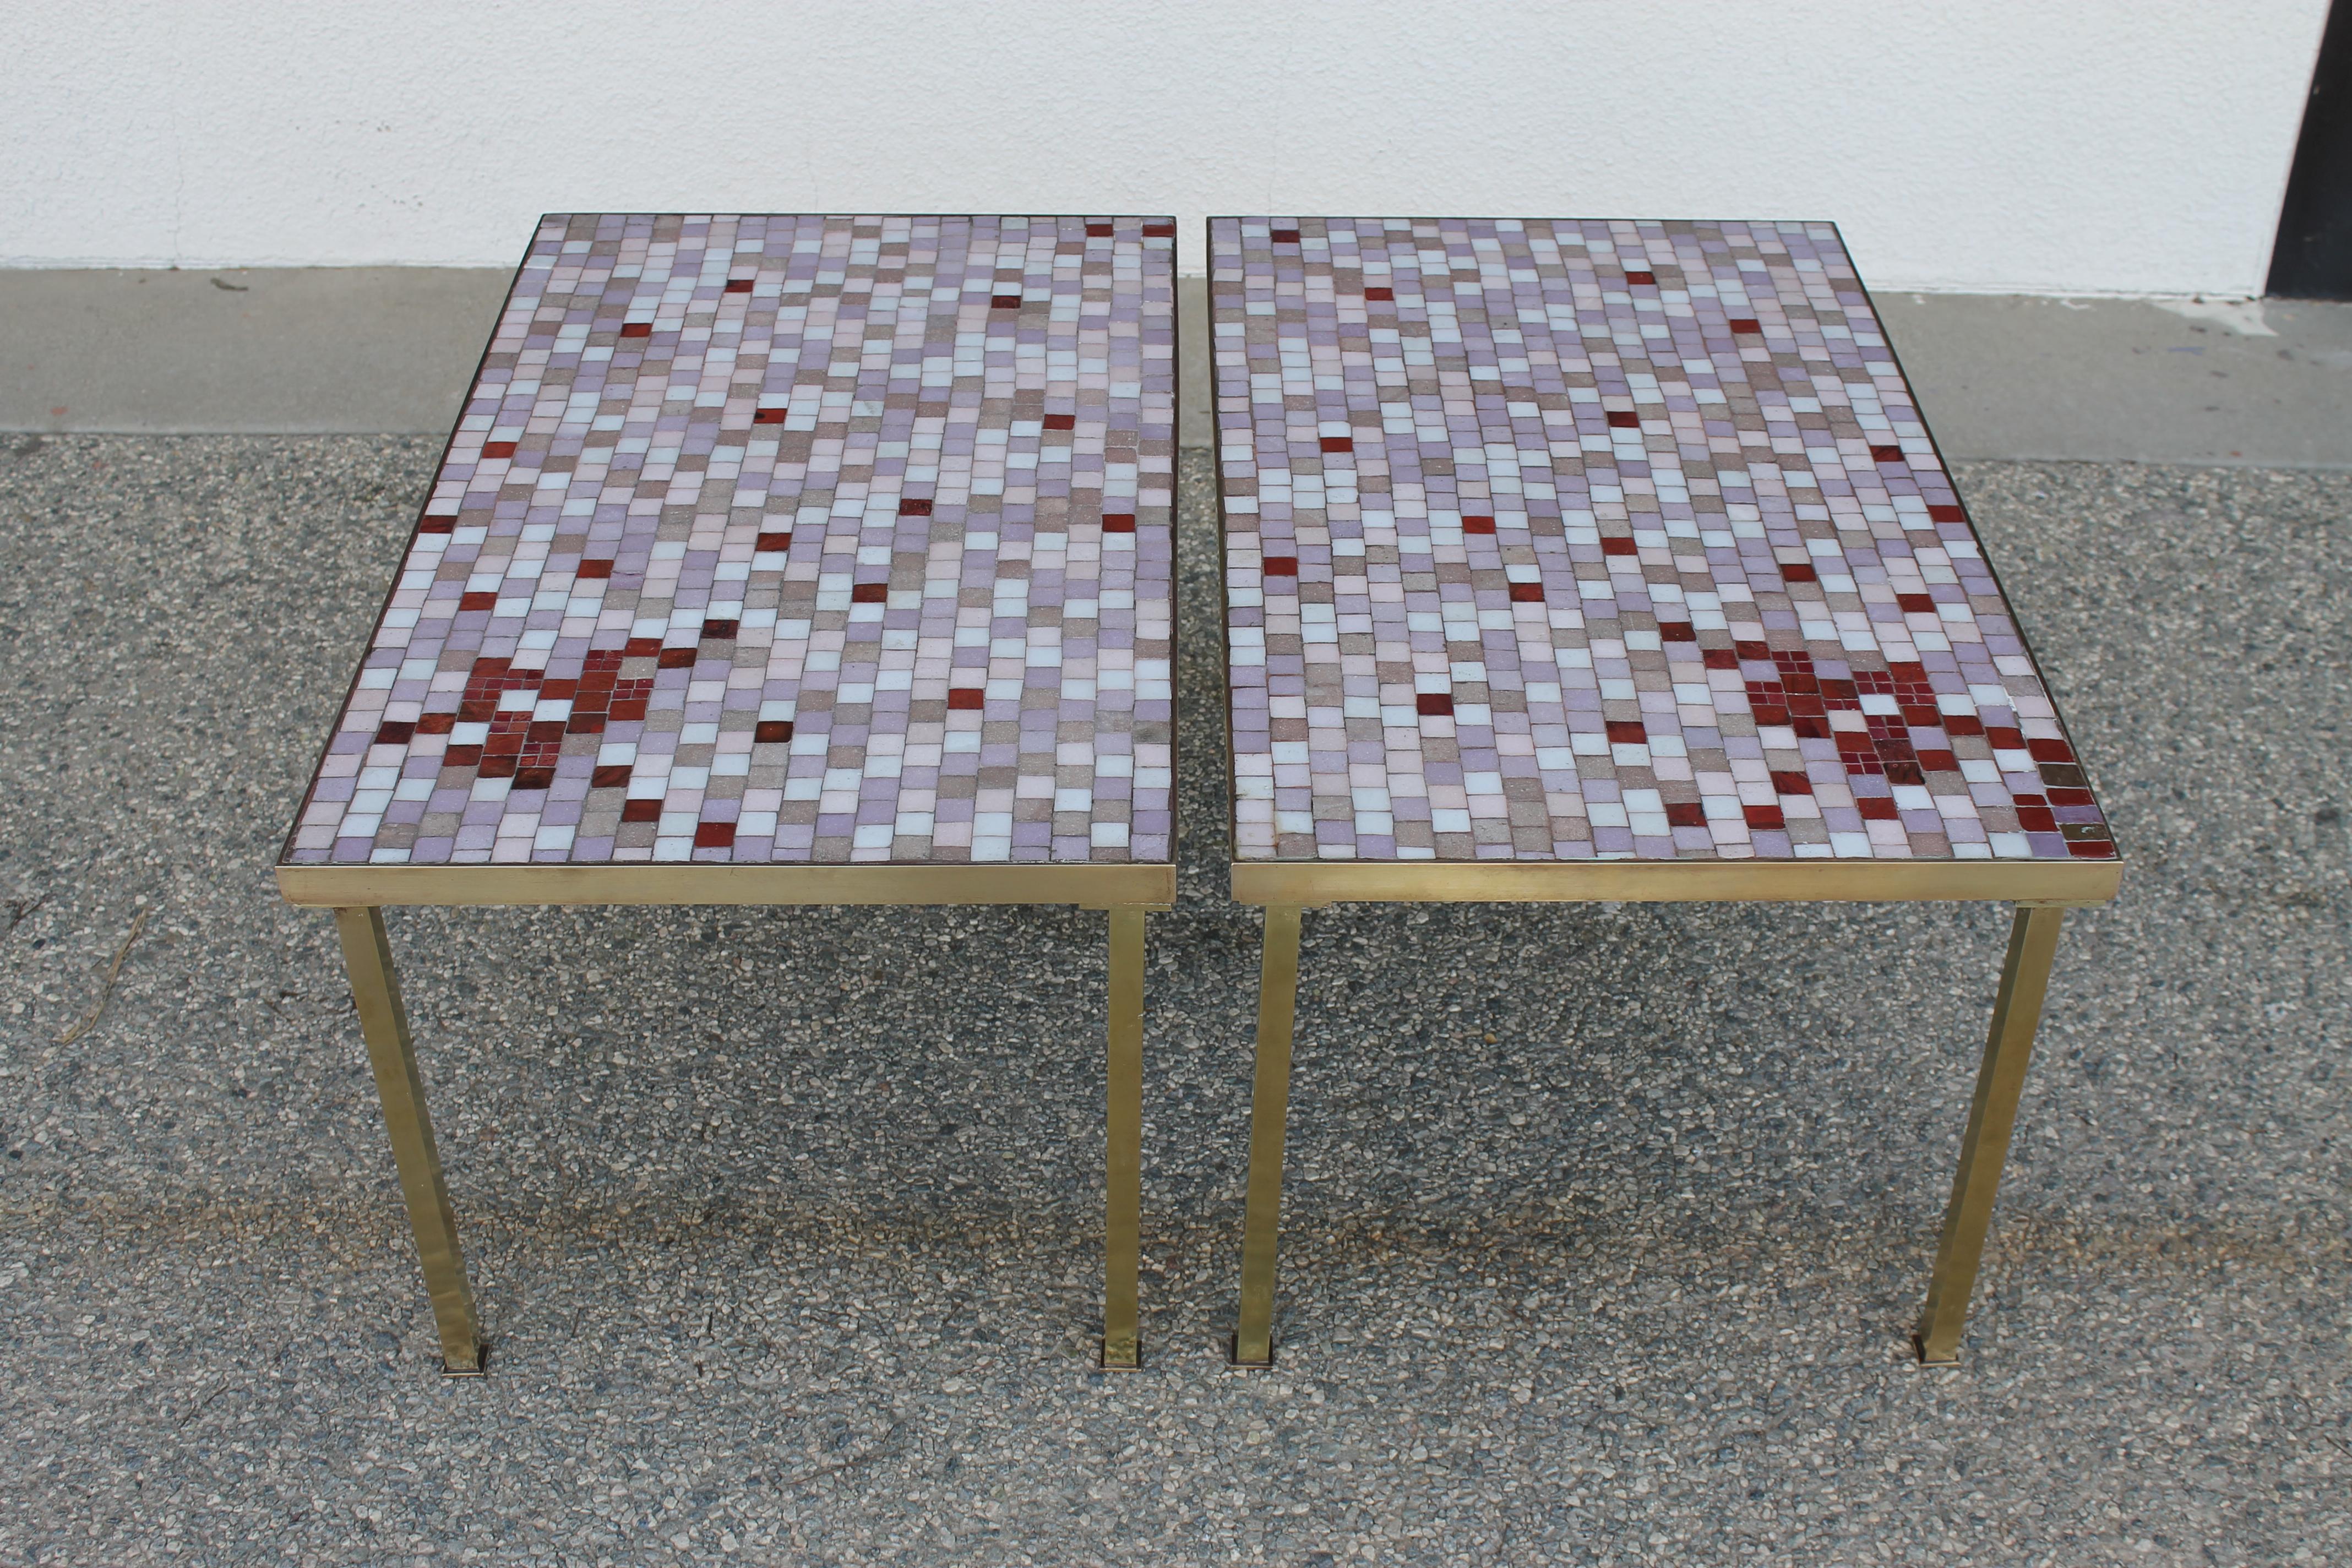 Pair of Modernist glass tile top brass side tables. Brass frame and square tube legs. Colored glass tiles in lavender, white, pink, and rust. Perfect to use as end tables or together as a coffee table. Each table measures 30.25